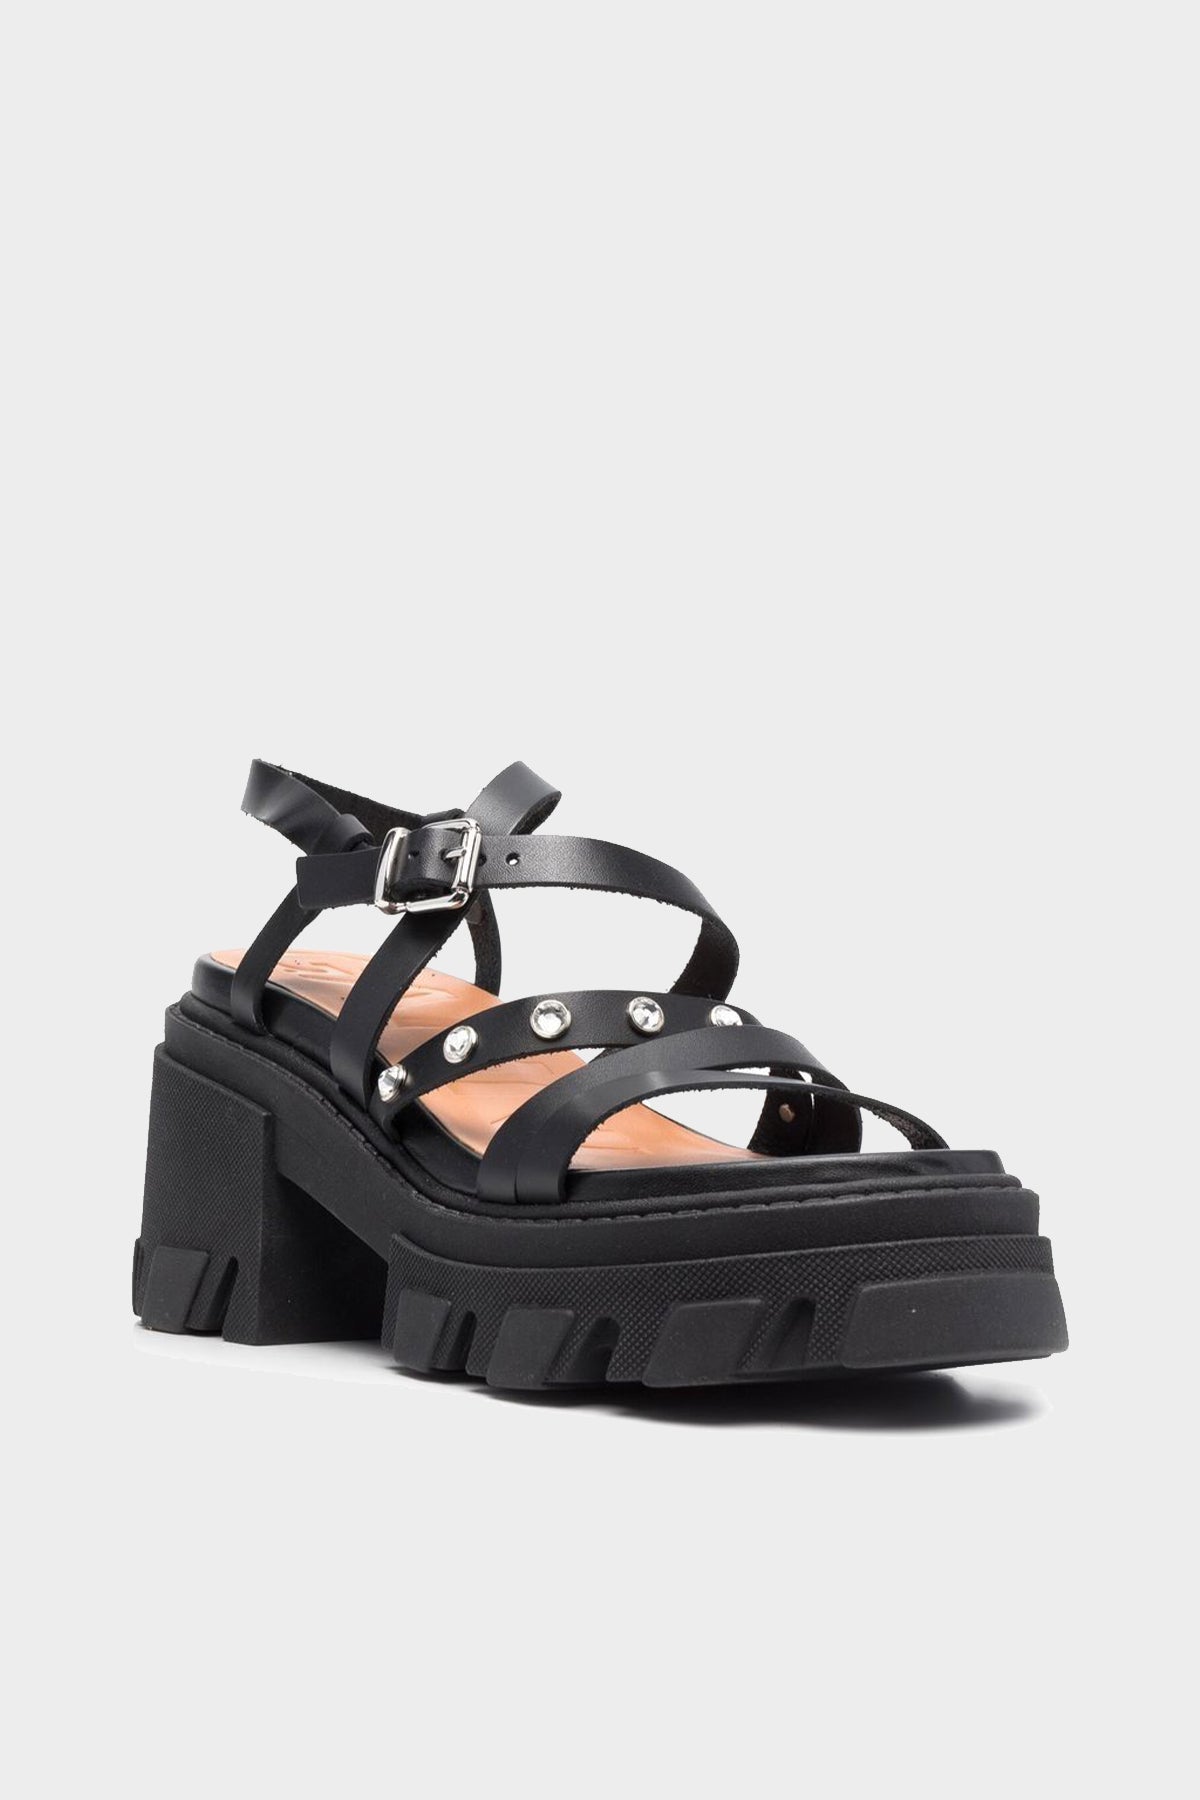 Cleated Strappy Sandal in Black - shop-olivia.com